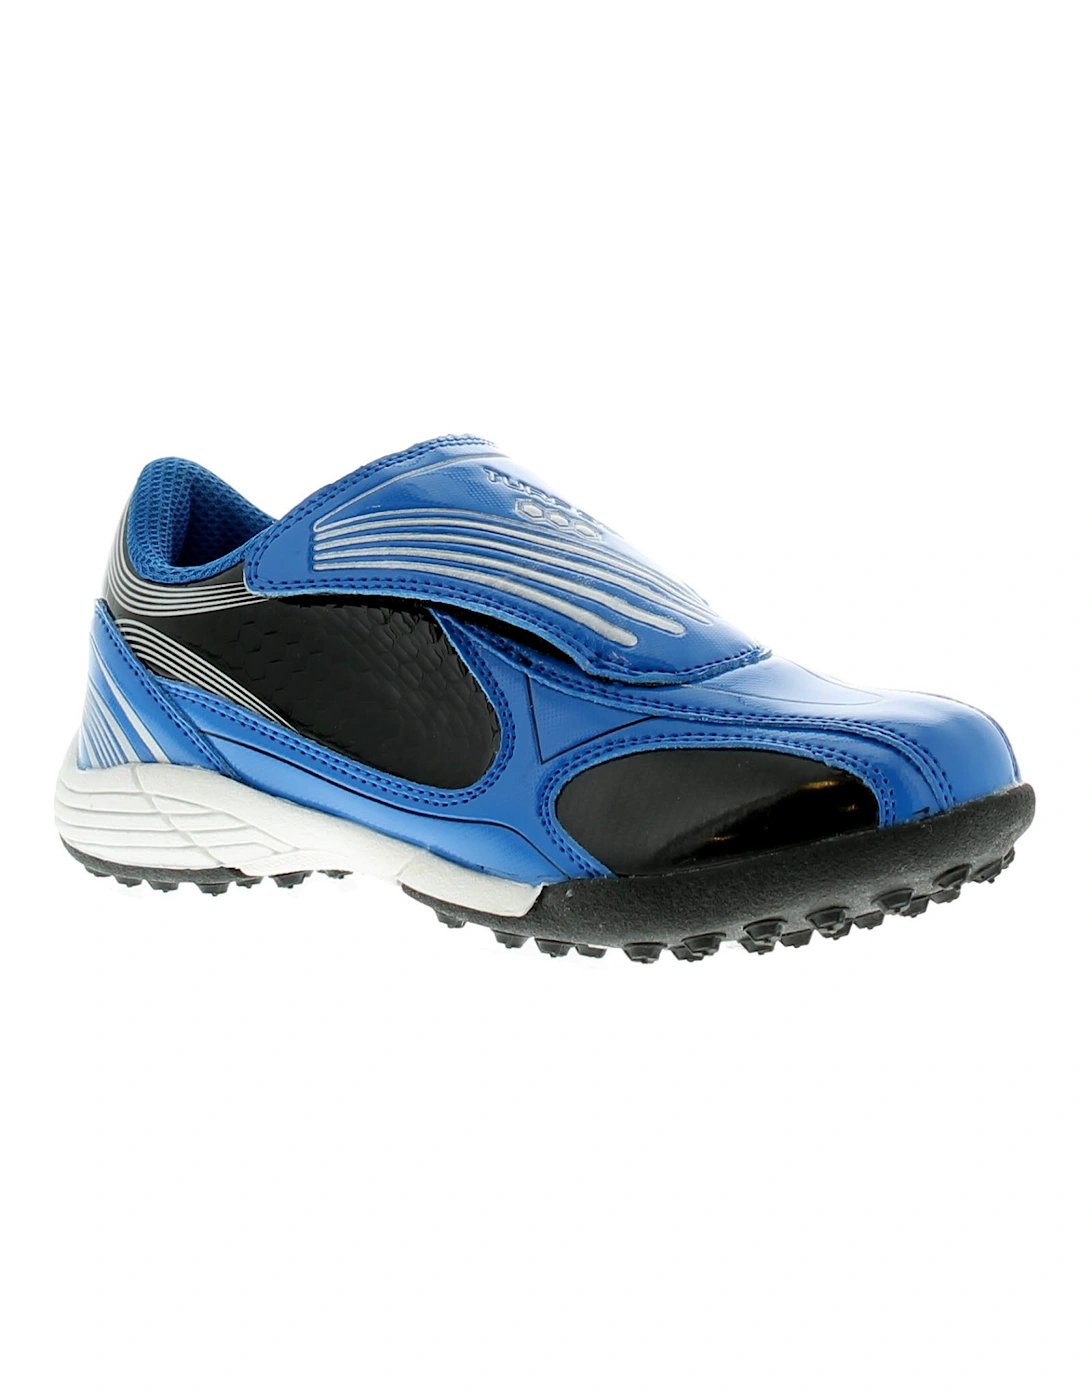 Boy's Childrens/ Blue Touch Fastening Astro Turf/Football Trainers UK Size